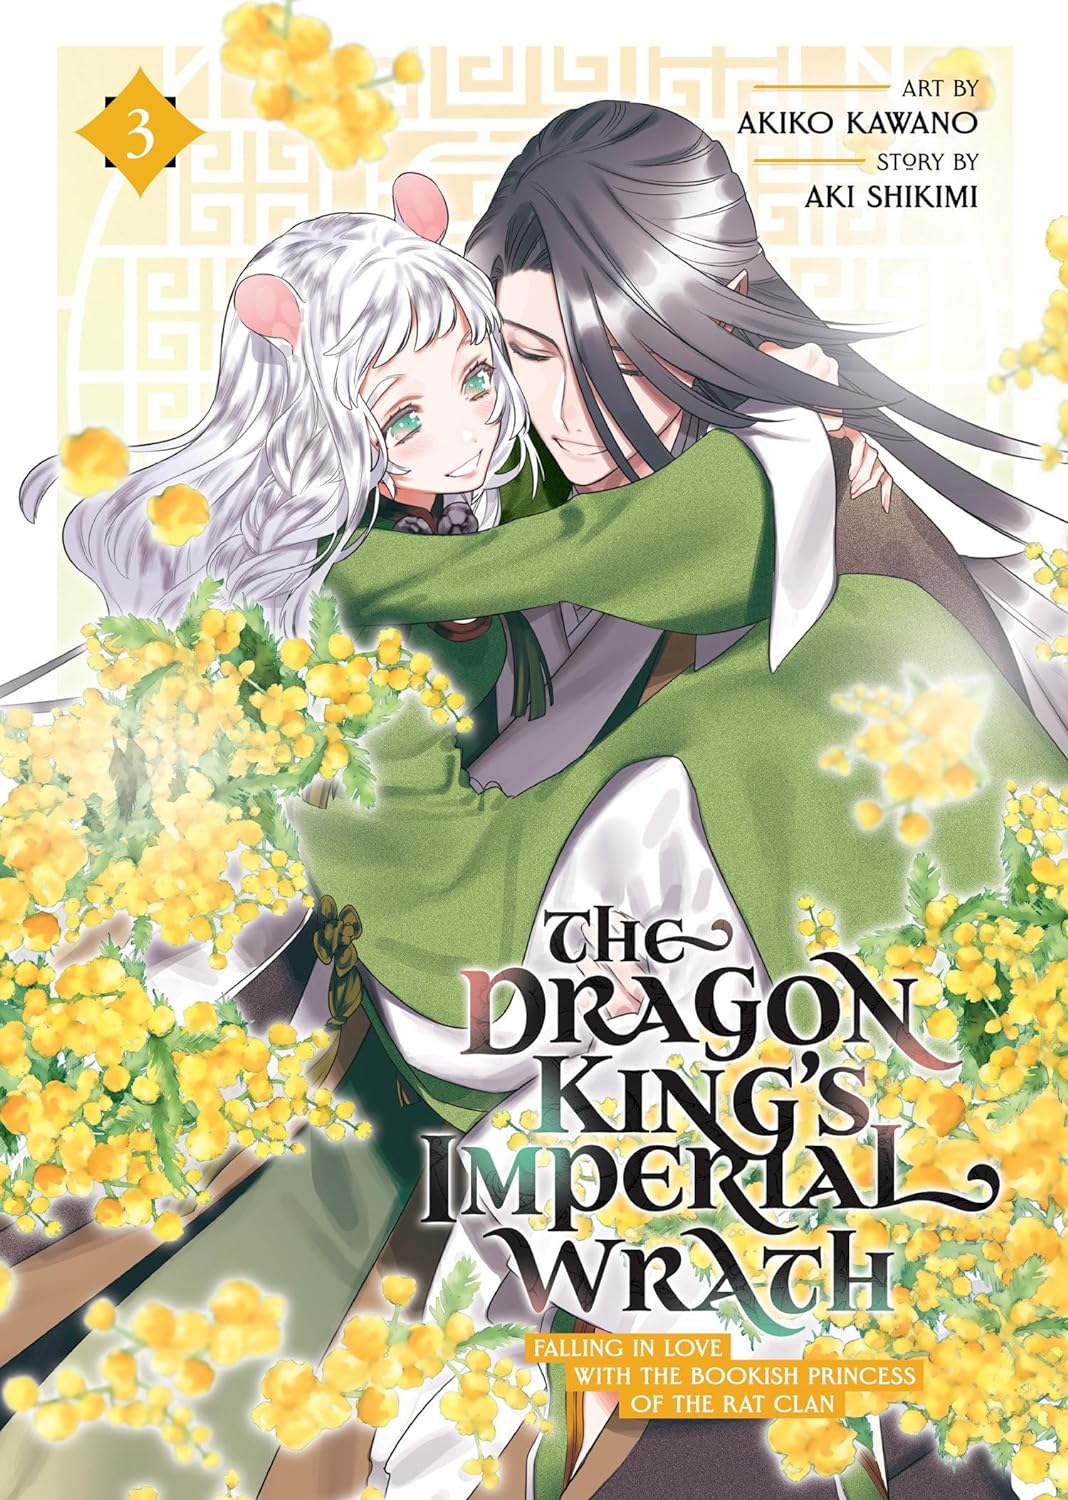 The Dragon King's Imperial Wrath: Falling in Love with the Bookish Princess of the Rat Clan Vol. 03